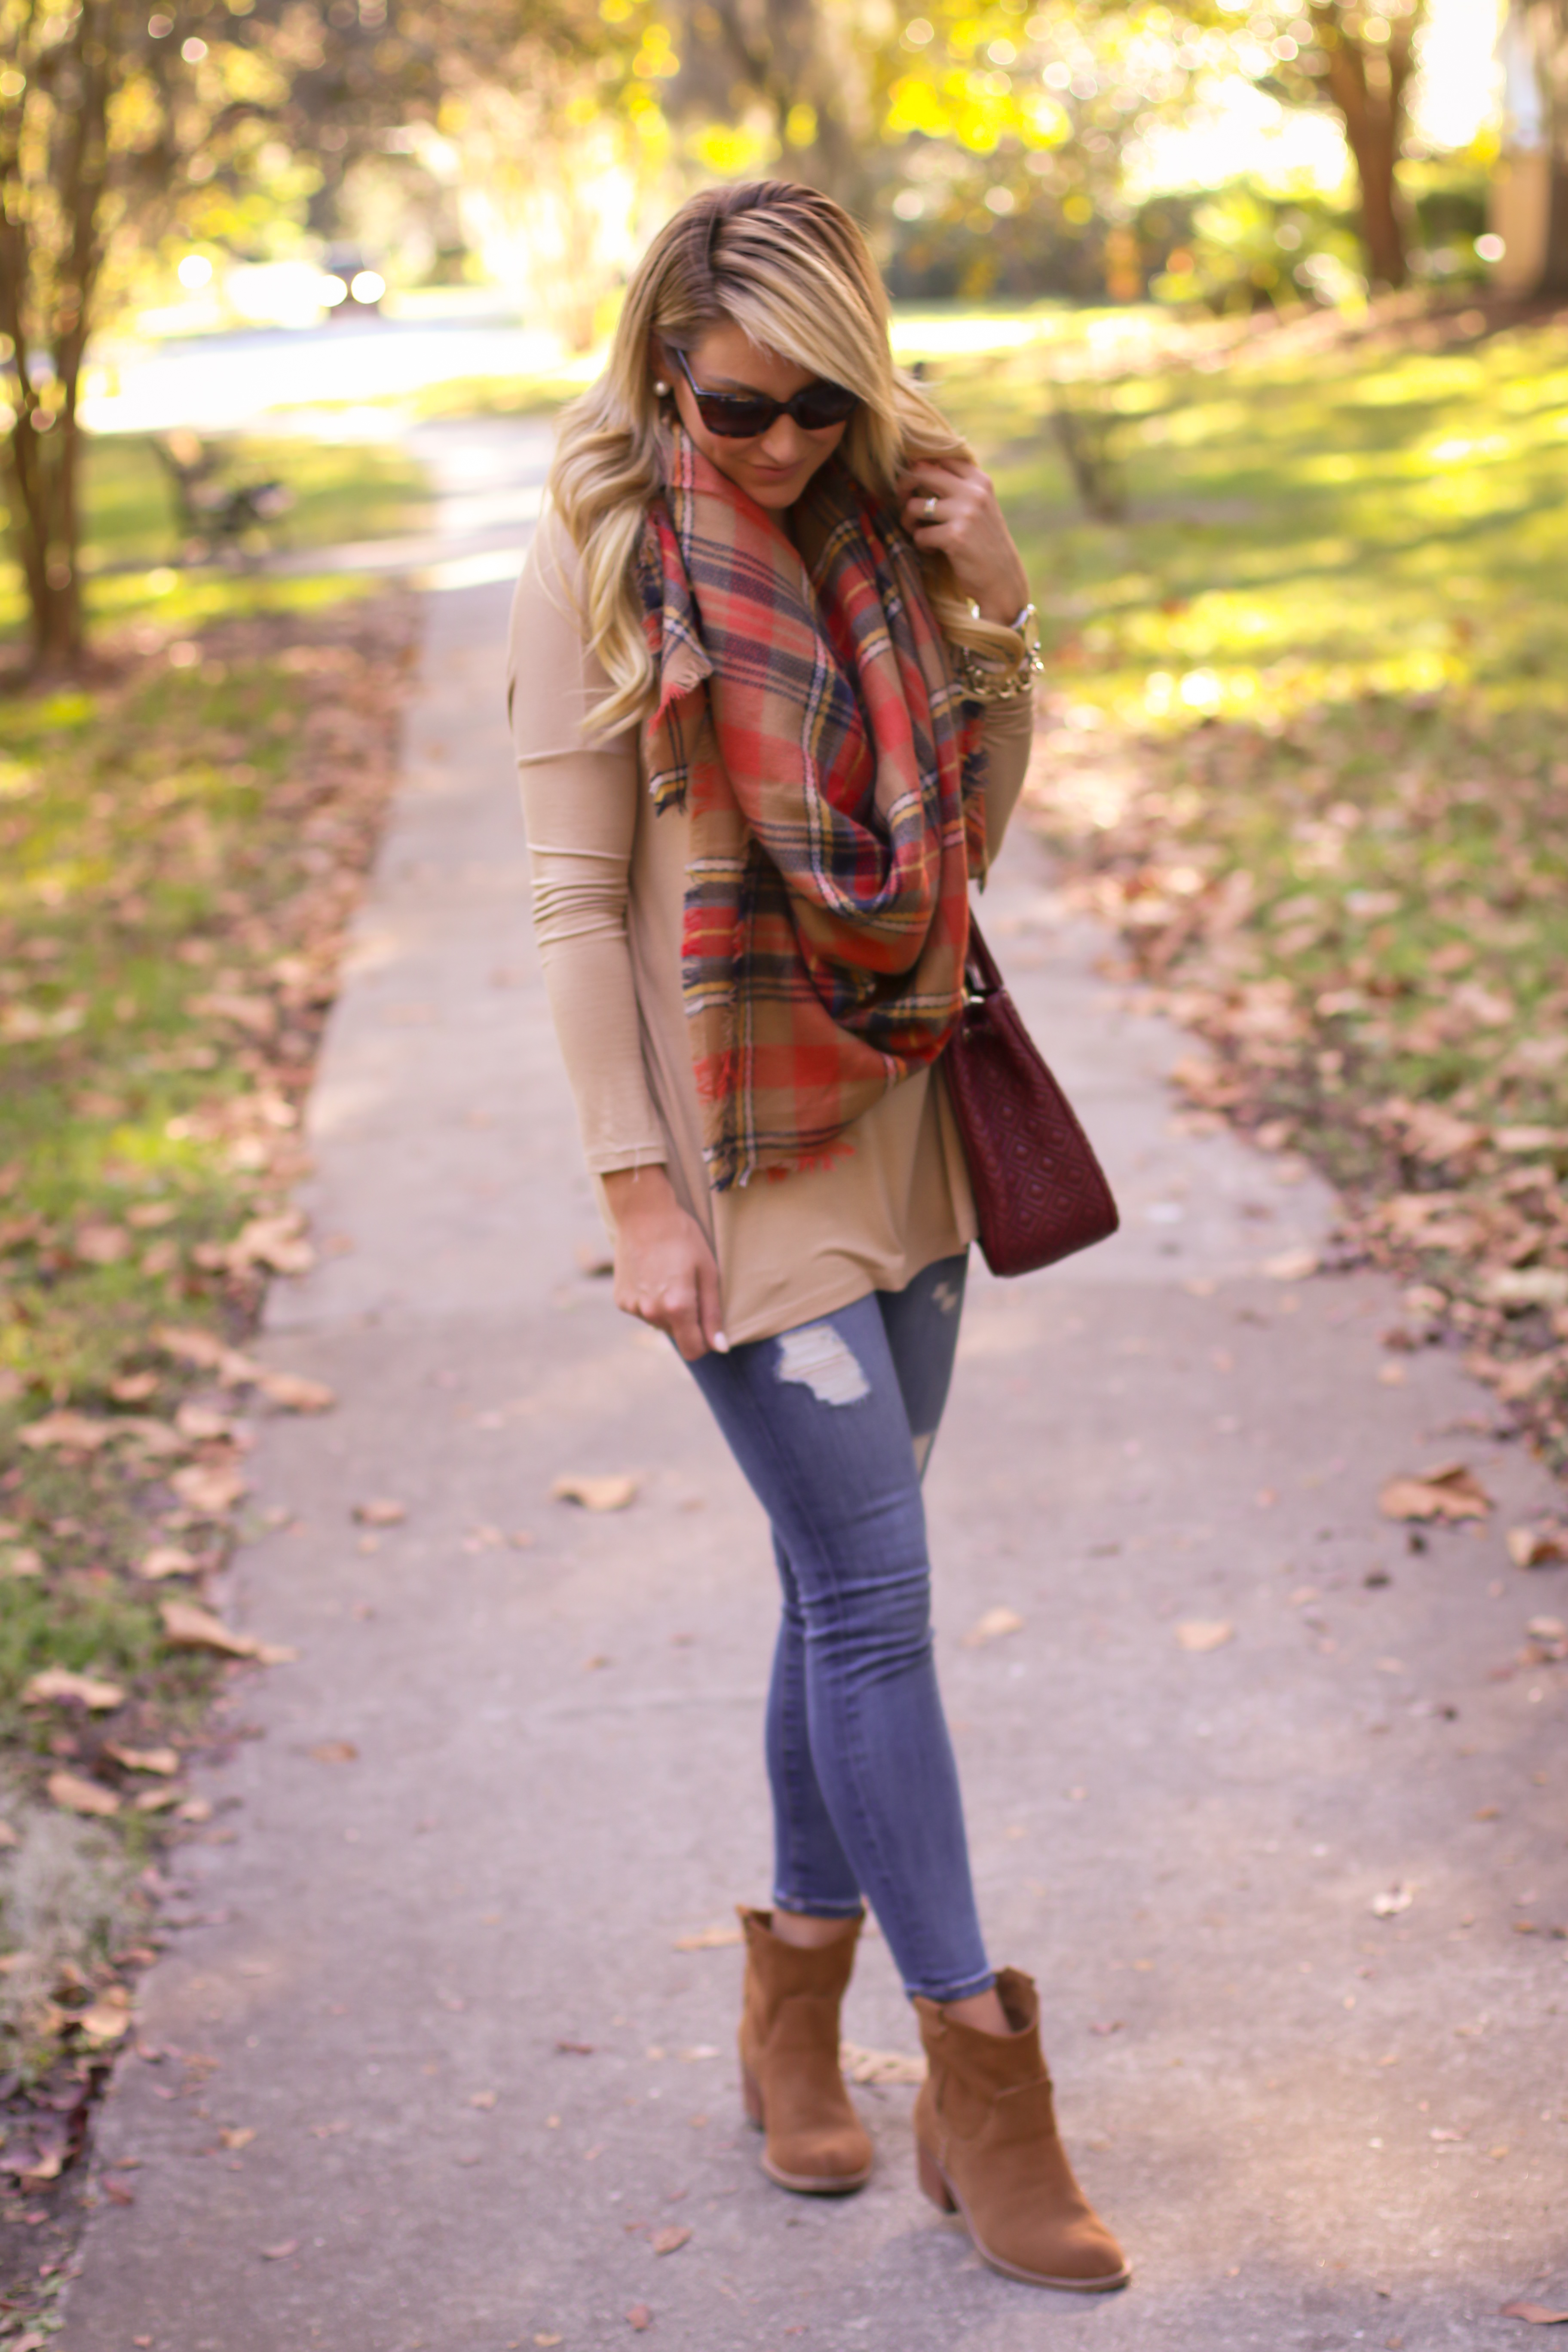 Frye Reina camel leather western booties, Louis Vuitton vintage Passy bag,  SheIn burgundy plaid scarf, plaid scarf with distressed denim and booties  fall outfit - Meagan's Moda